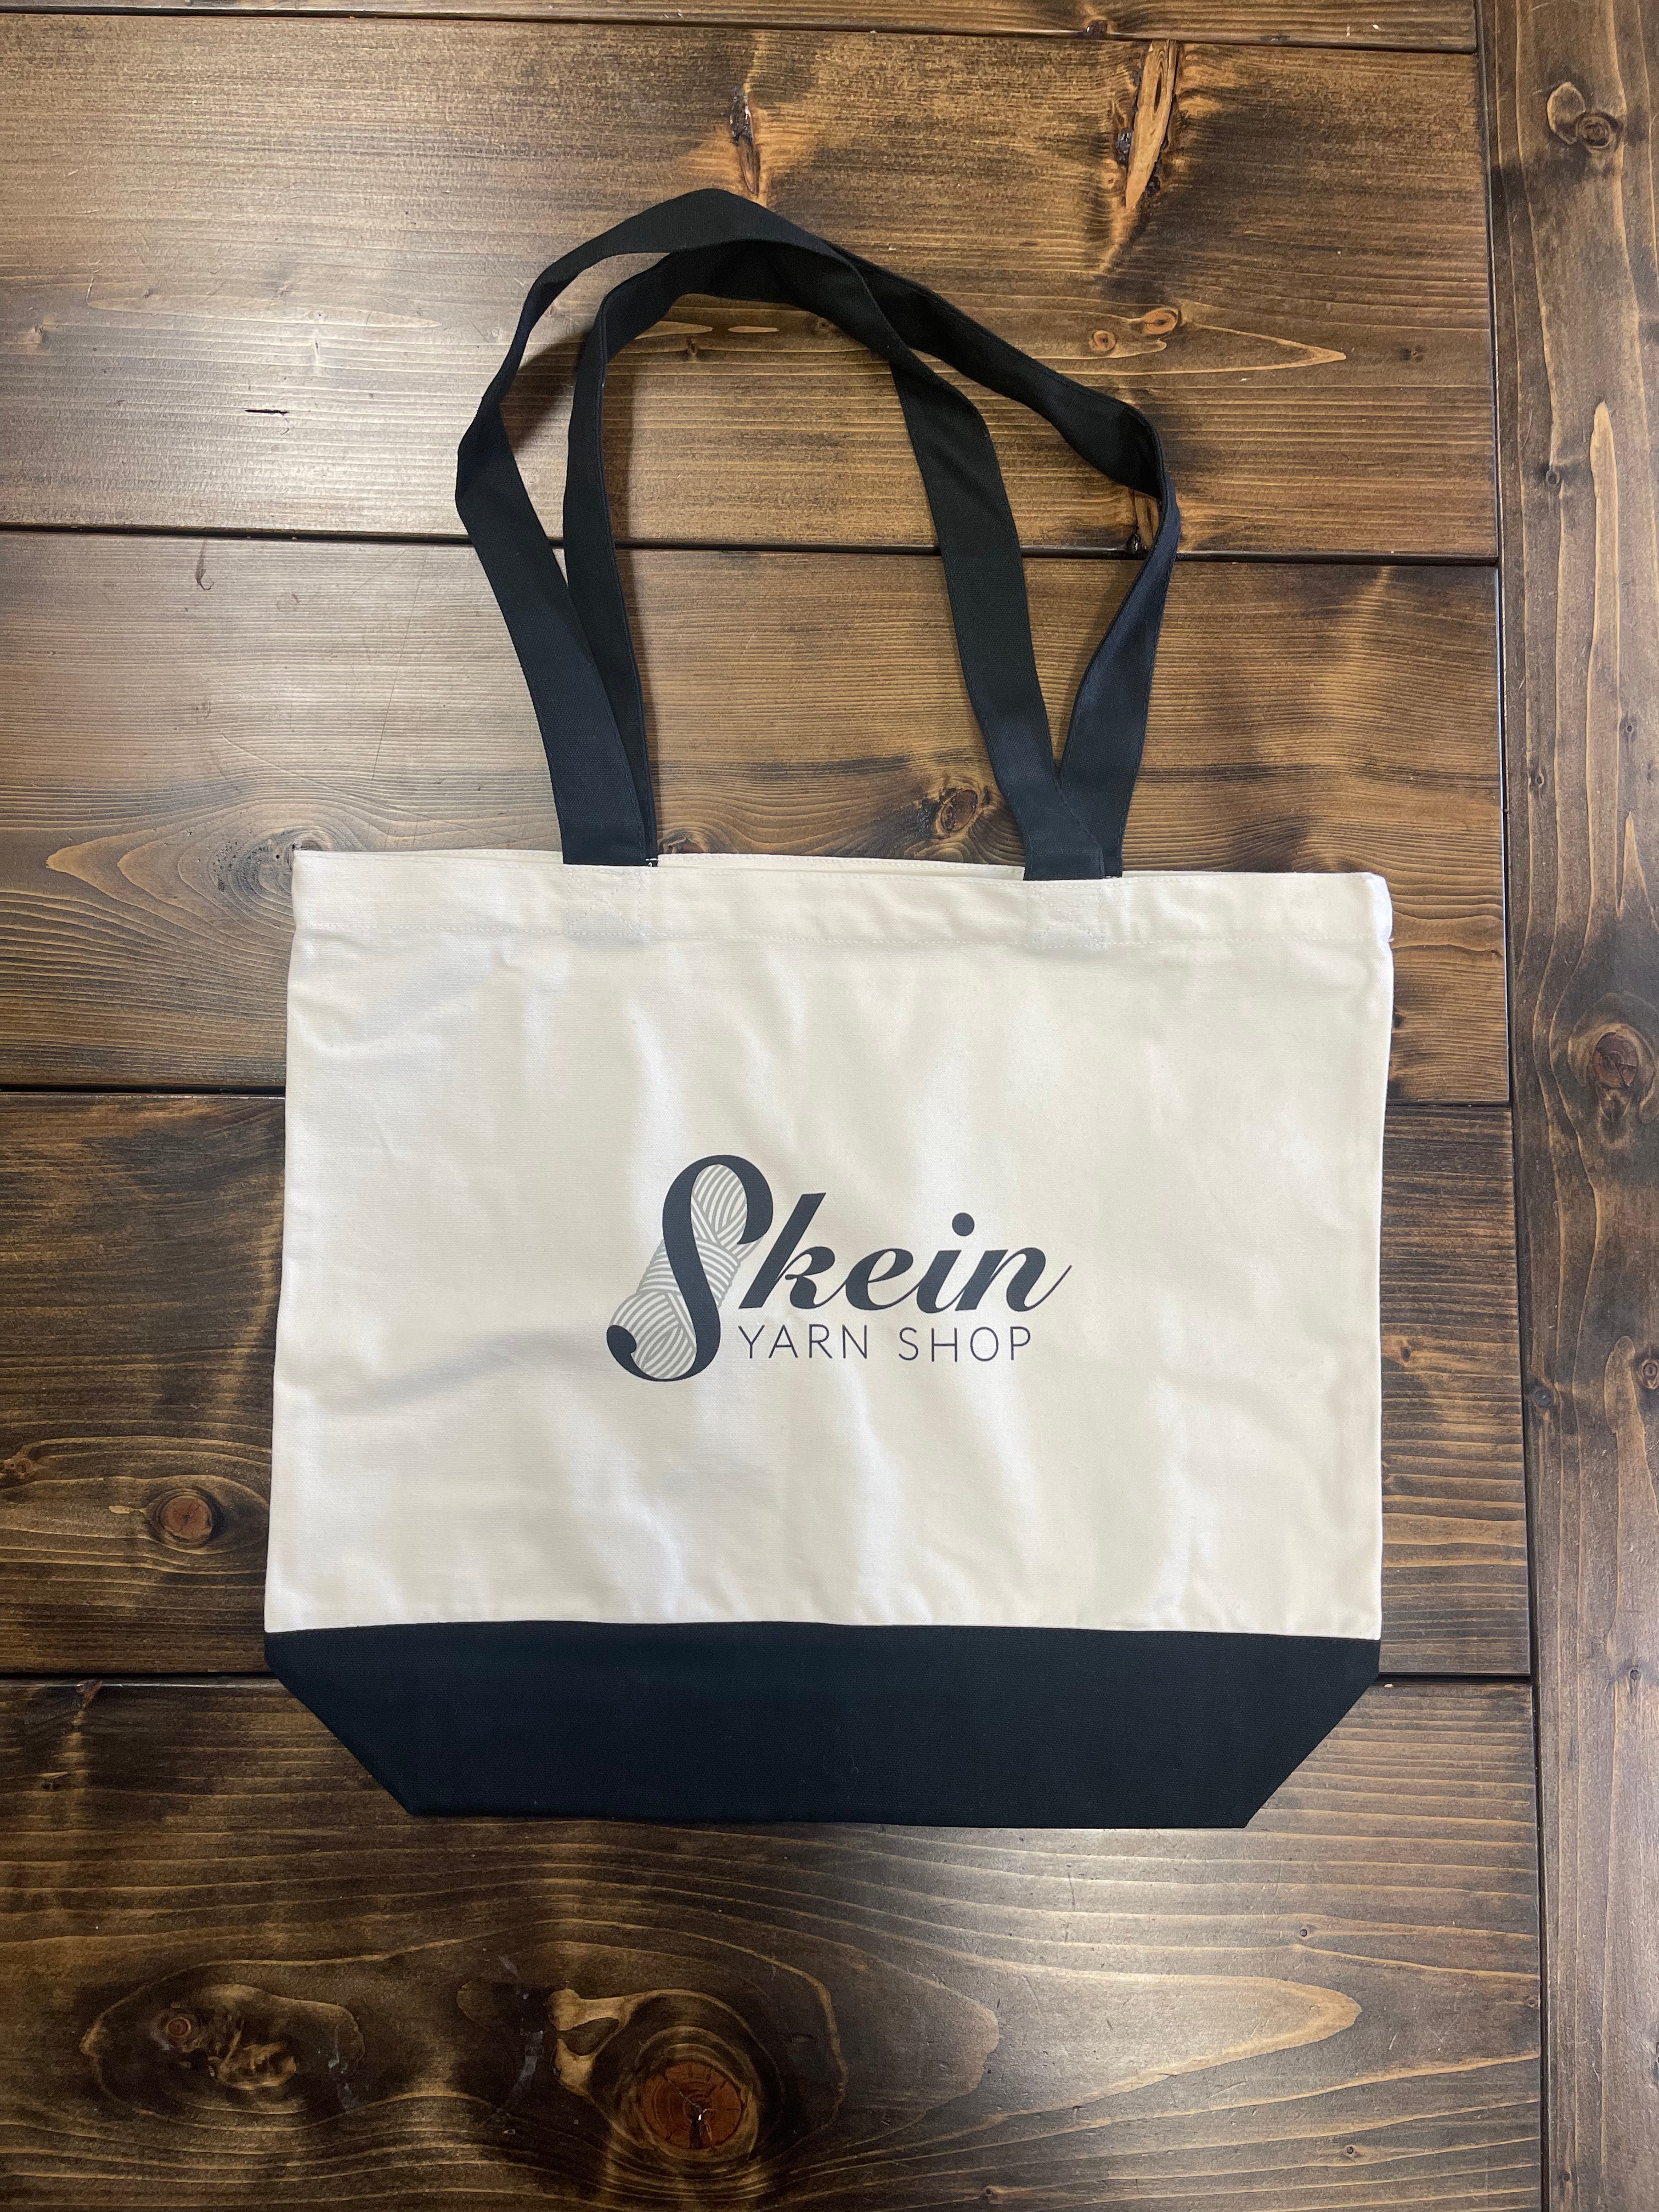 Keep Calm and Carry Yarn Tote – The Quilted Skein